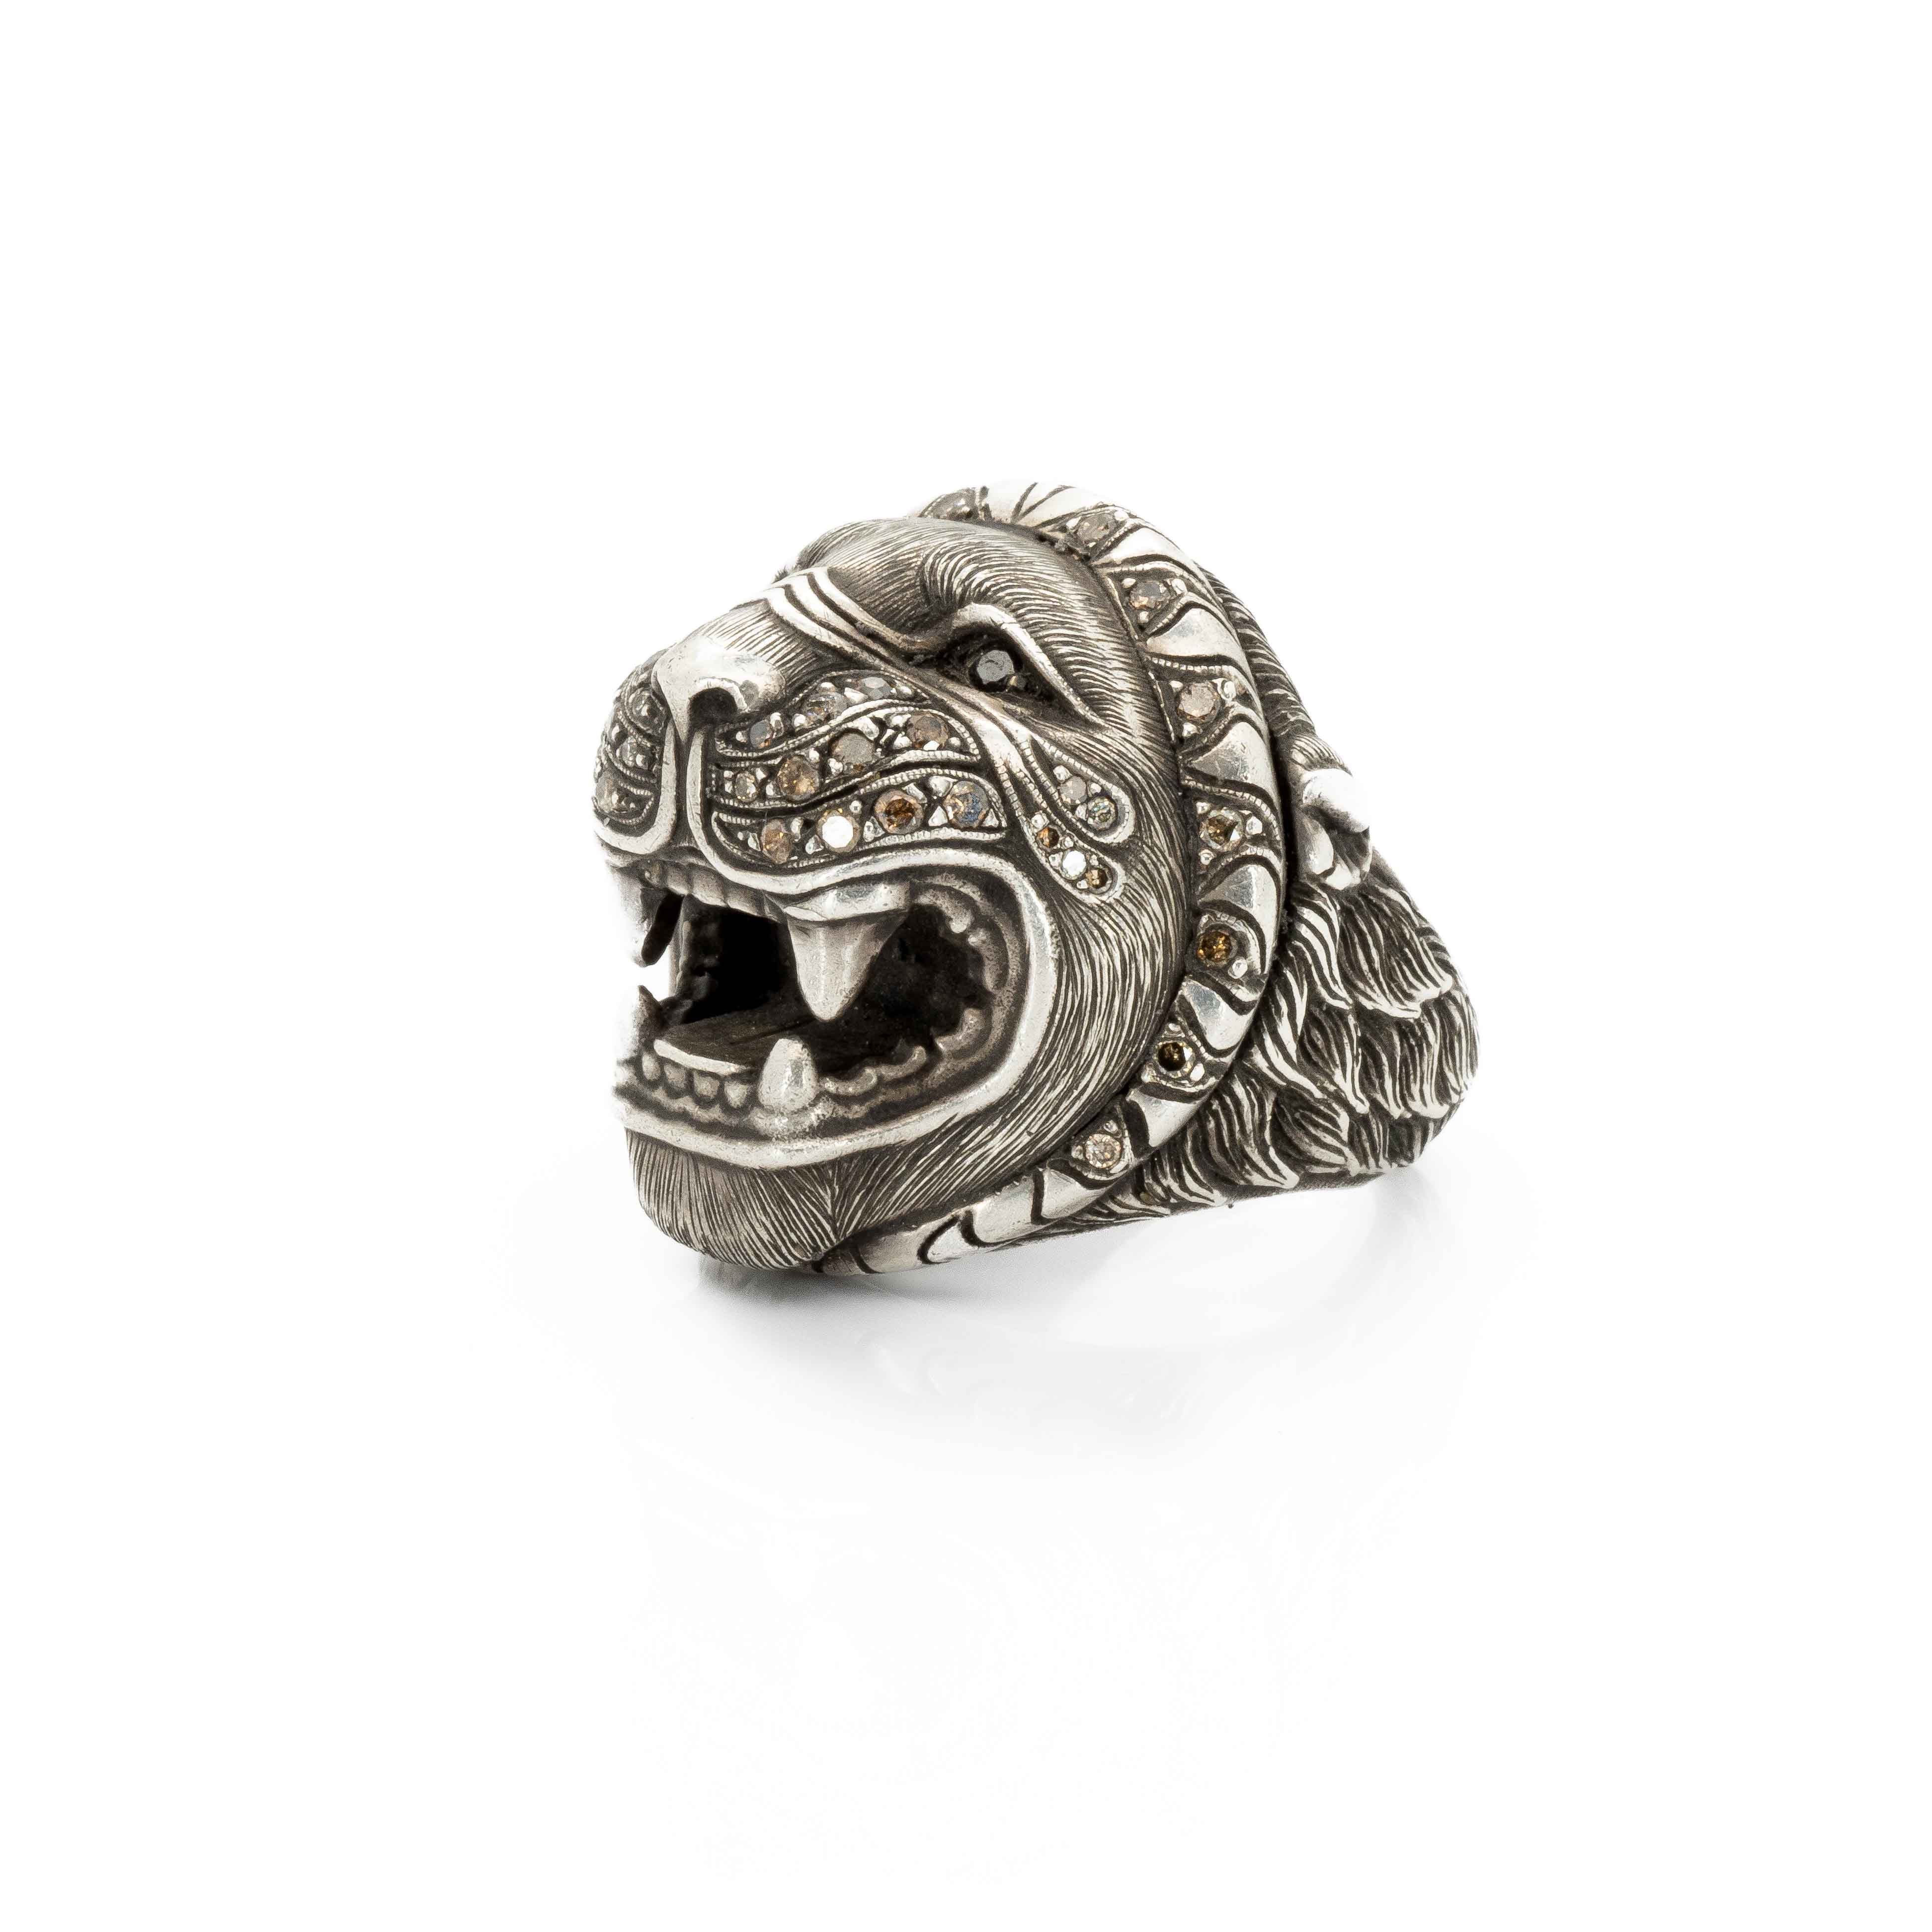 Taru Jewelry stunning lion ring is crafted from sterling silver and adorned with sparkling brown and black diamonds. The intricate details of the lion&#39;s face are hand-engraved, capturing the texture of its fur and the fierce expression of its eyes.